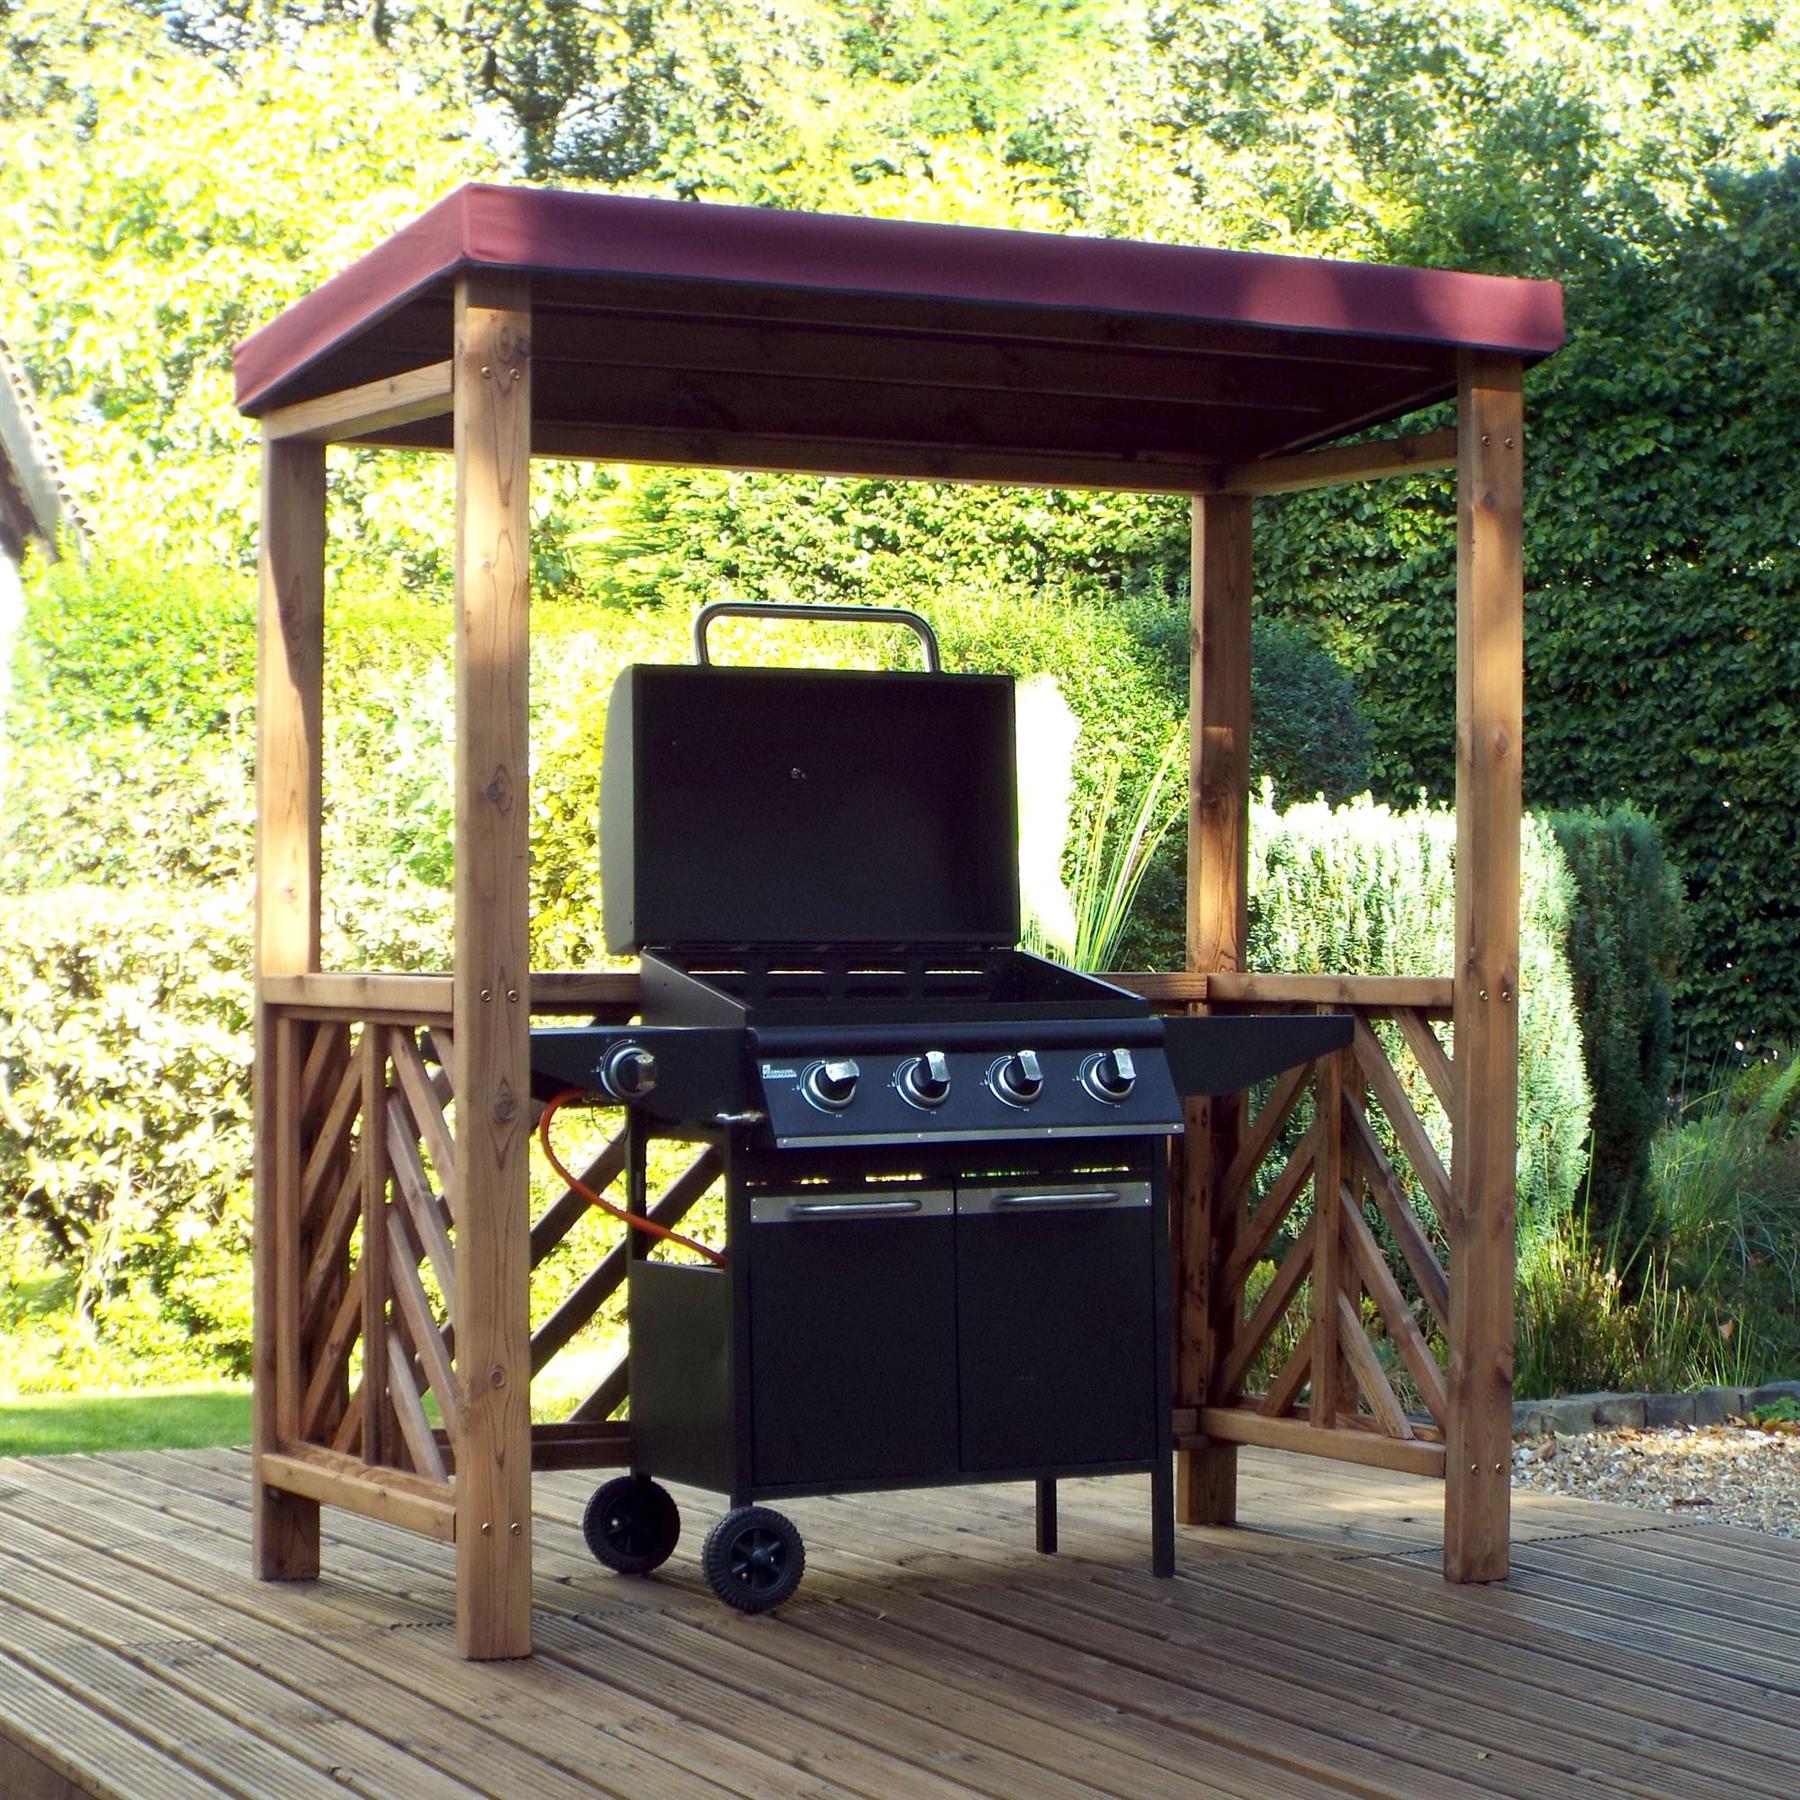 UK-Gardens Wooden Outdoor Barbeque Shelter with Burgundy Roof Cover ...